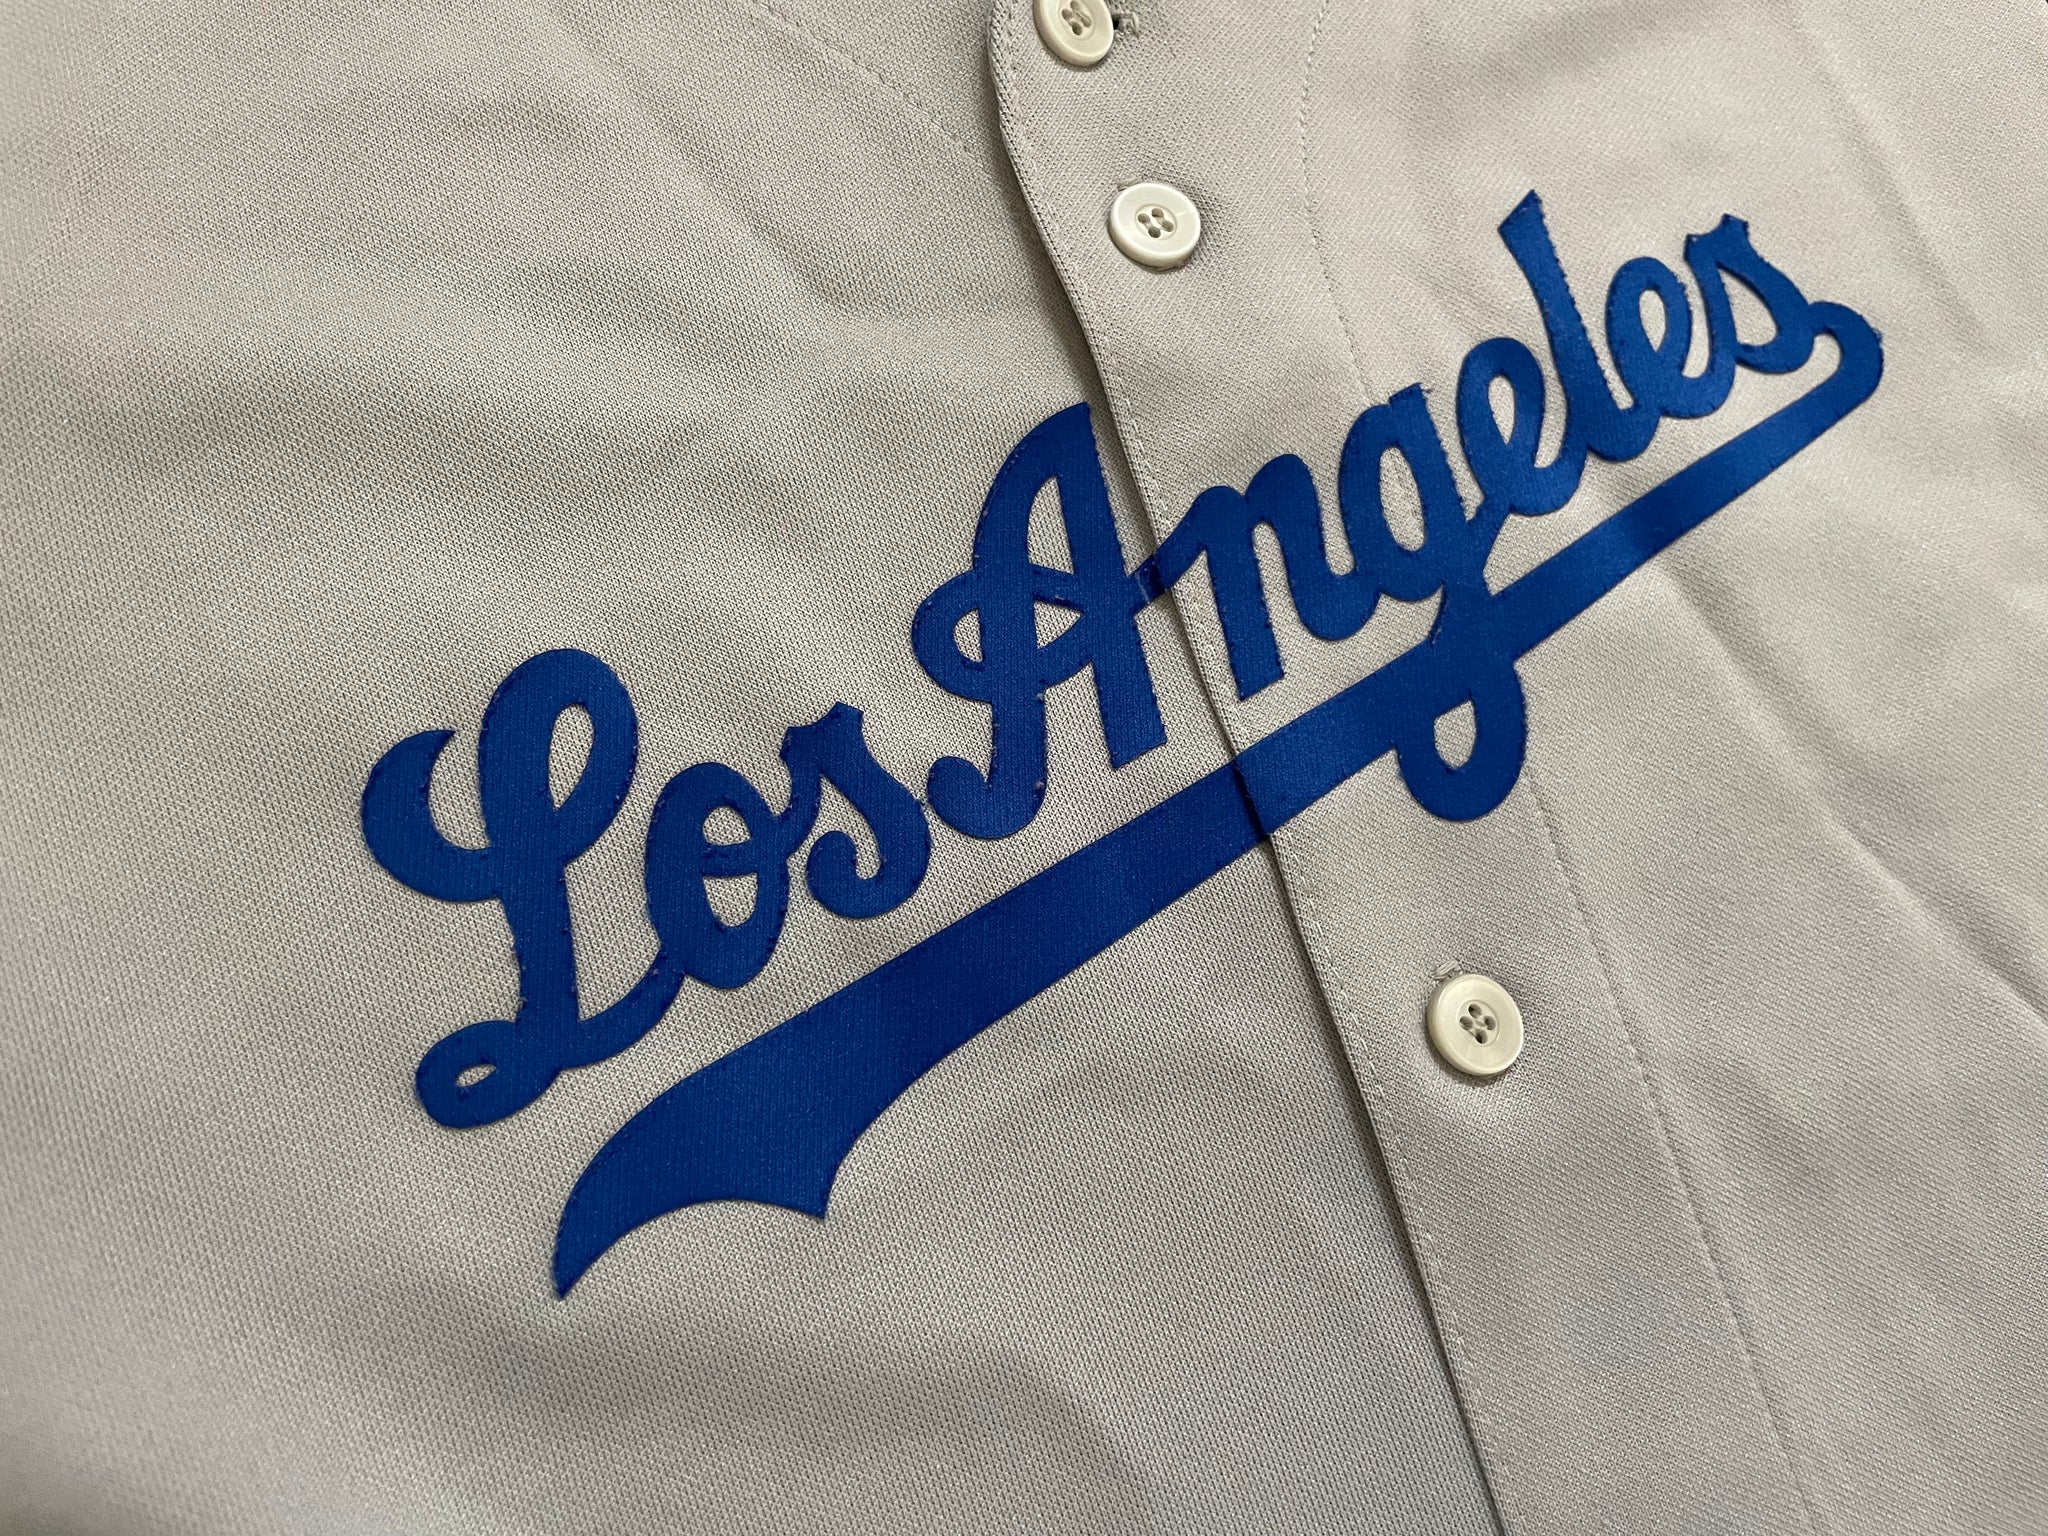 Los Angeles Dodgers Majestic Baseball Jersey, Size Youth Medium, 10-12 –  Stuck In The 90s Sports